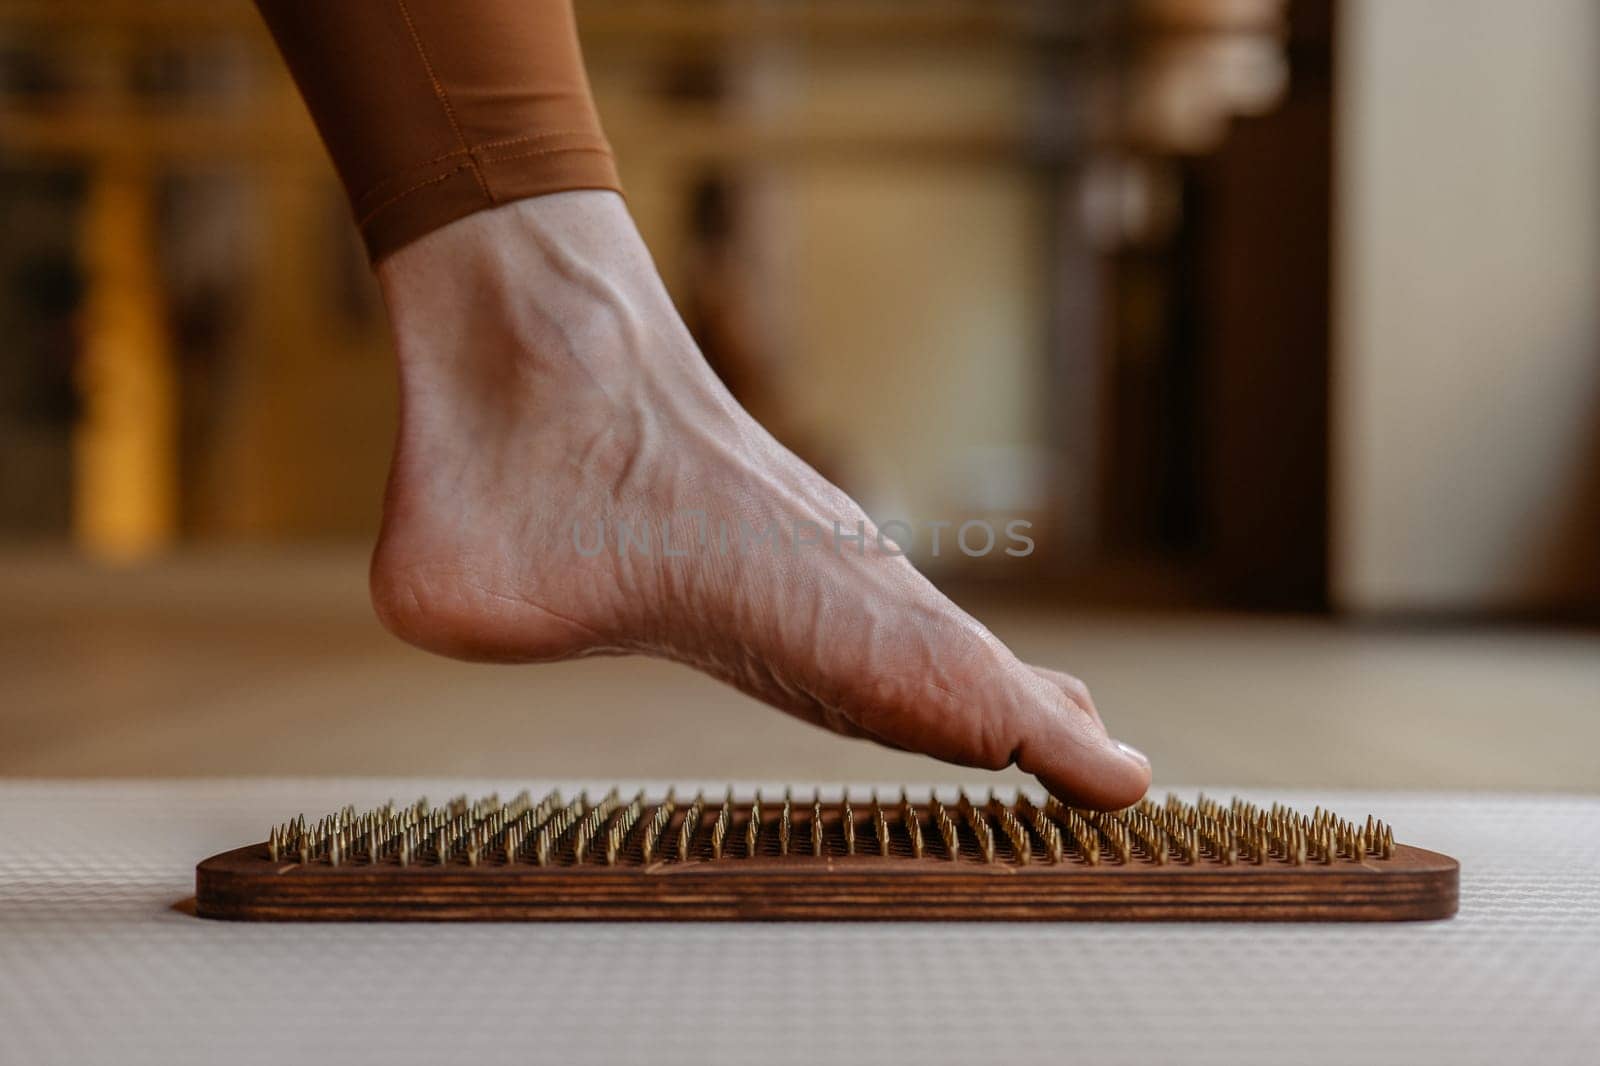 Exploring tactile sensations, a foot interacts with wooden acupressure pegs by apavlin